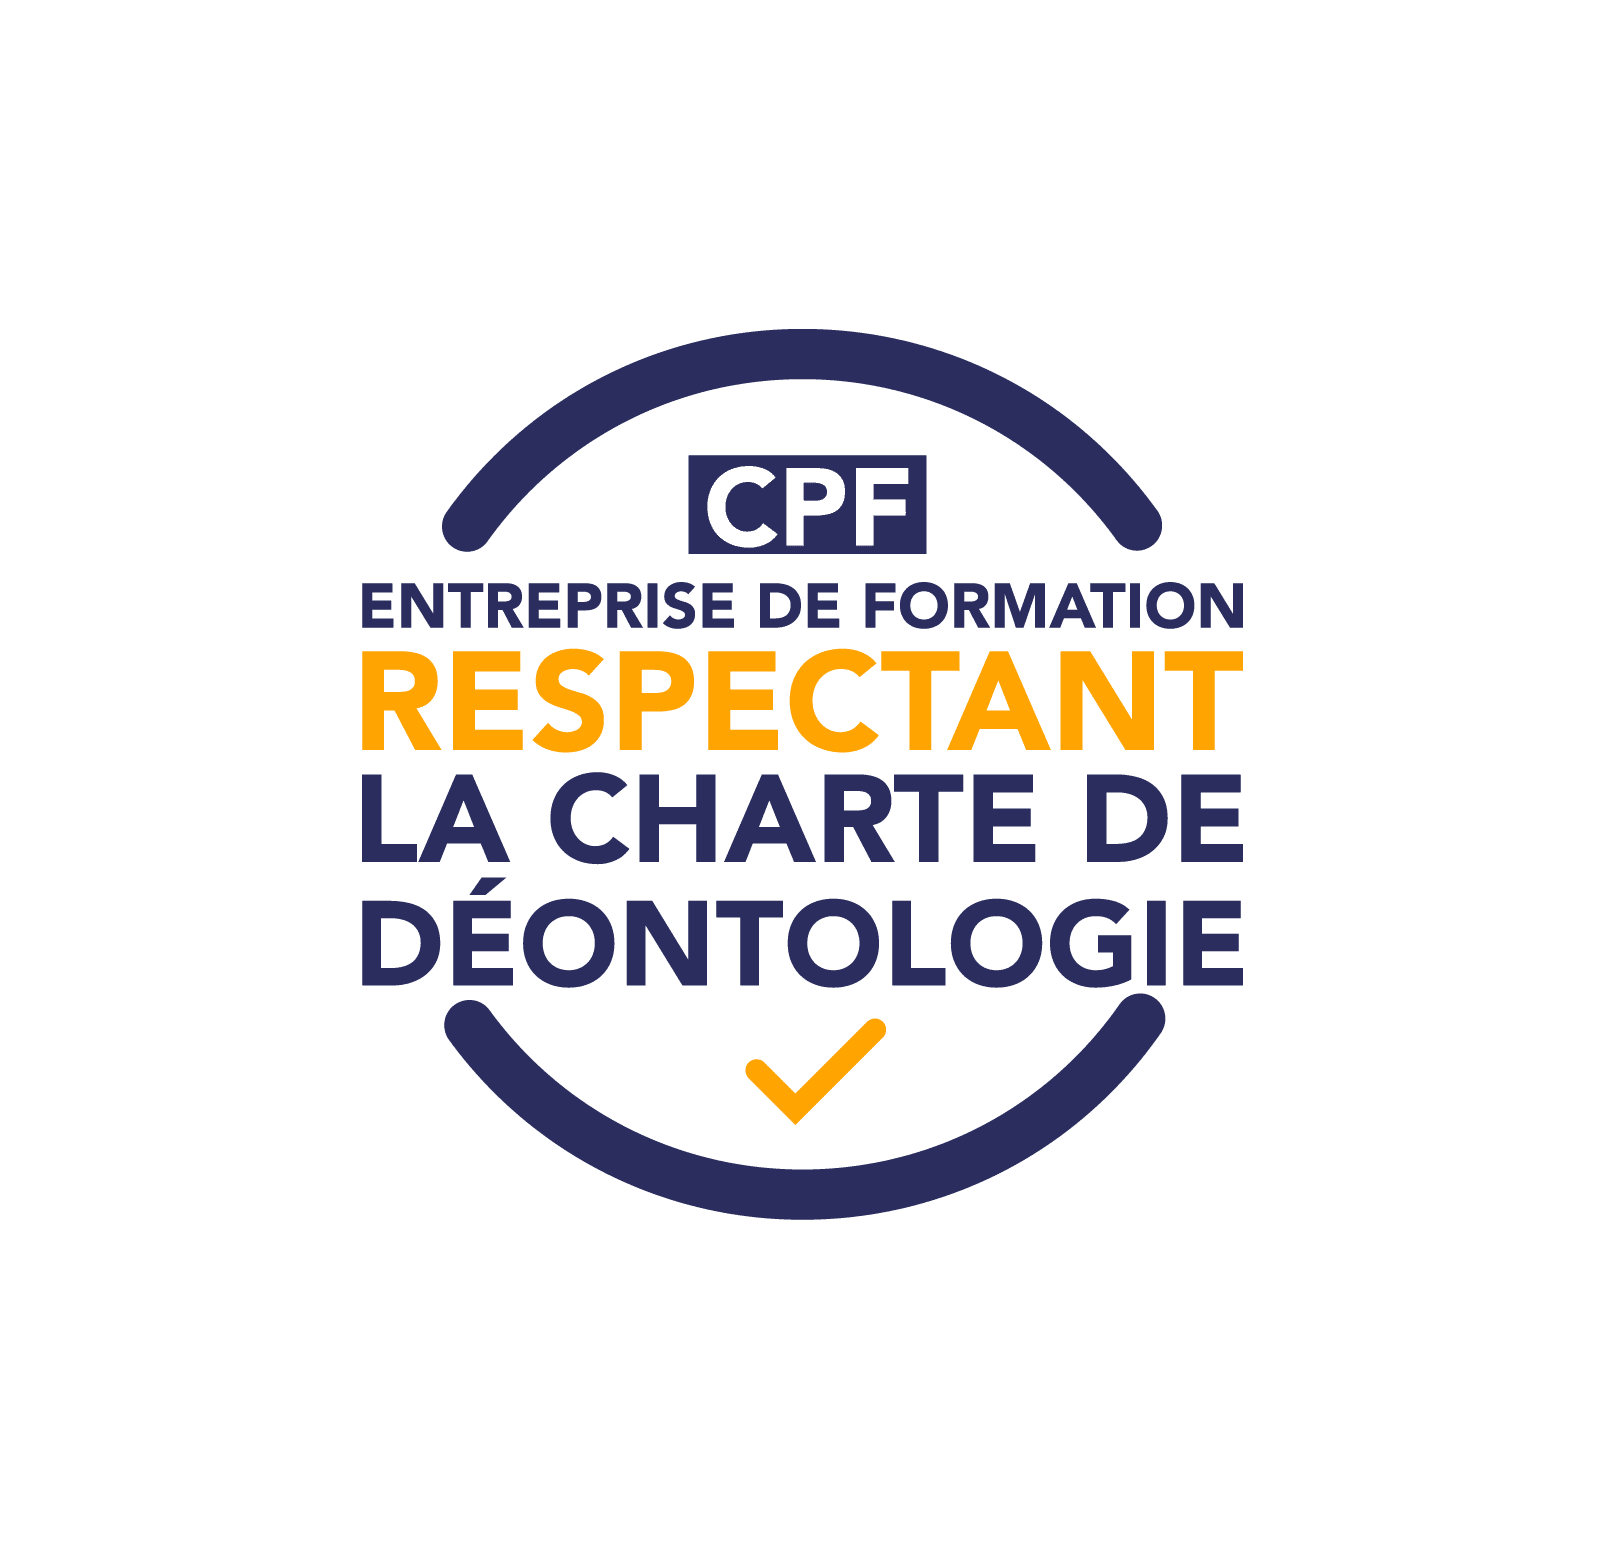 Charte-deontologie-CPF-Formation